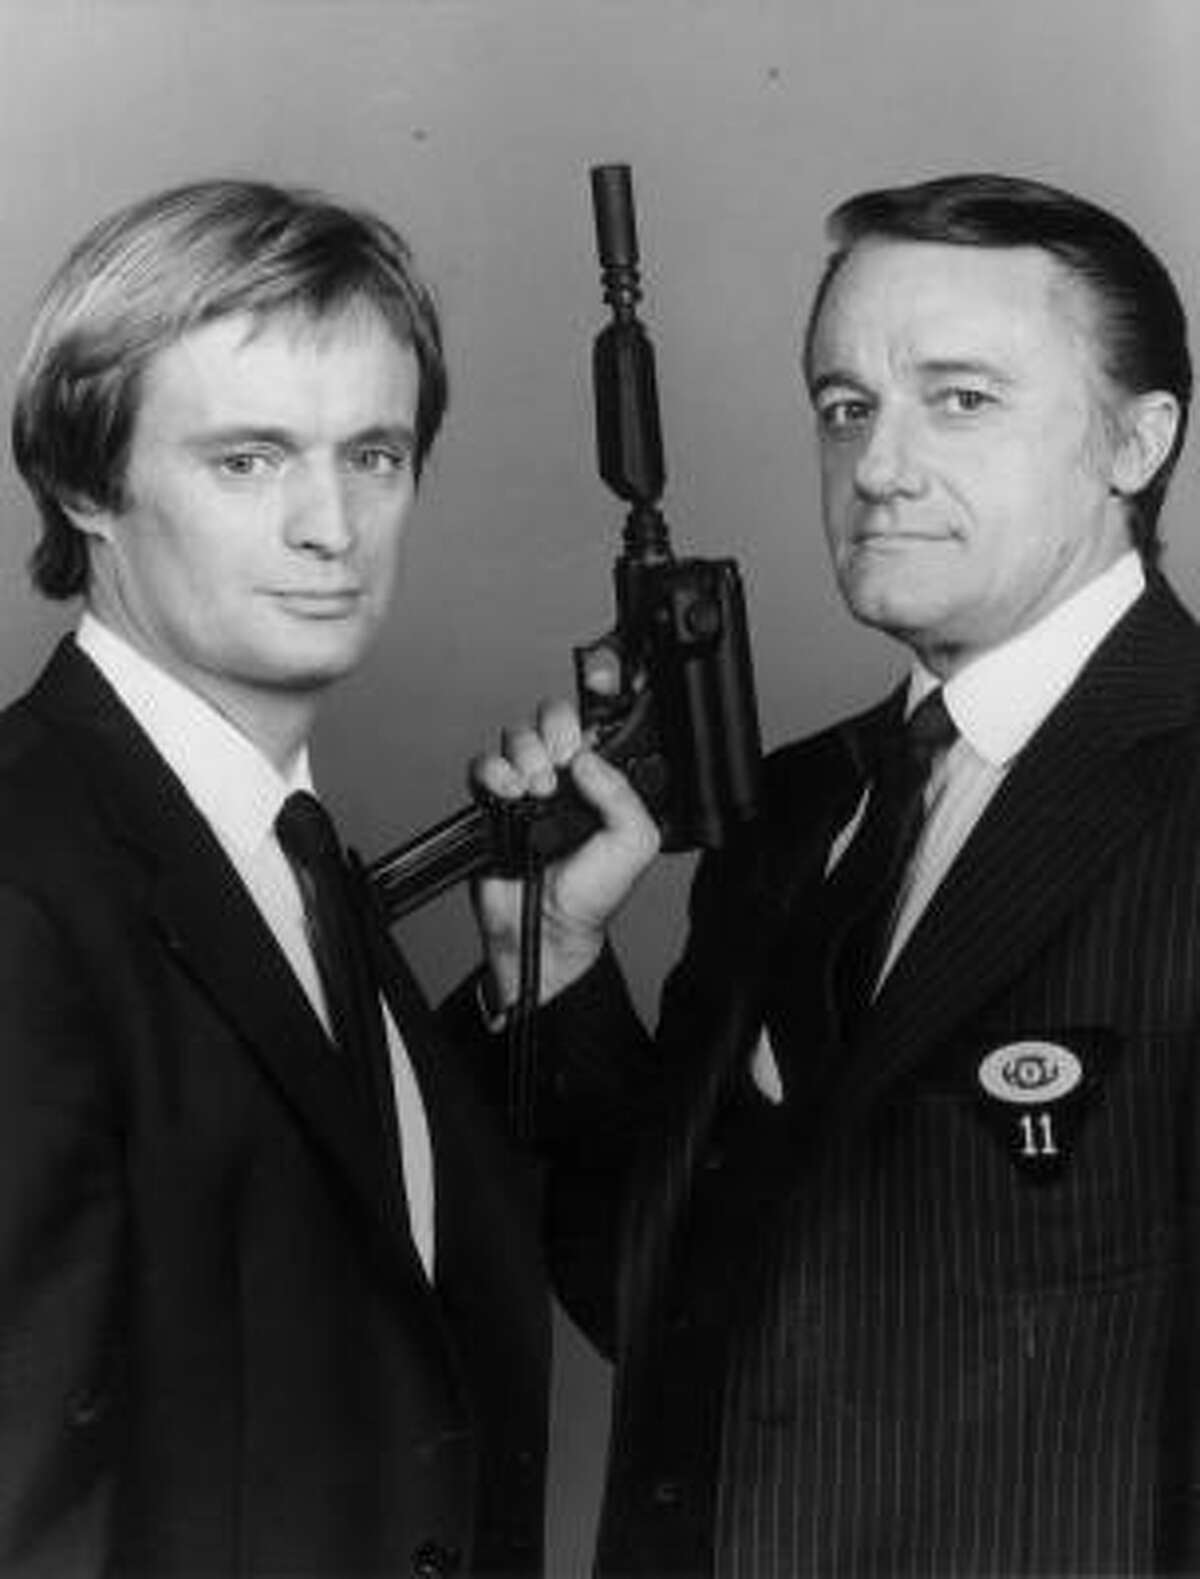 David McCallum, left, and Robert Vaughn played high-energy superagents in the hit 1960s spy The Man From U.N.C.L.E.series The complete series is being released on DVD.